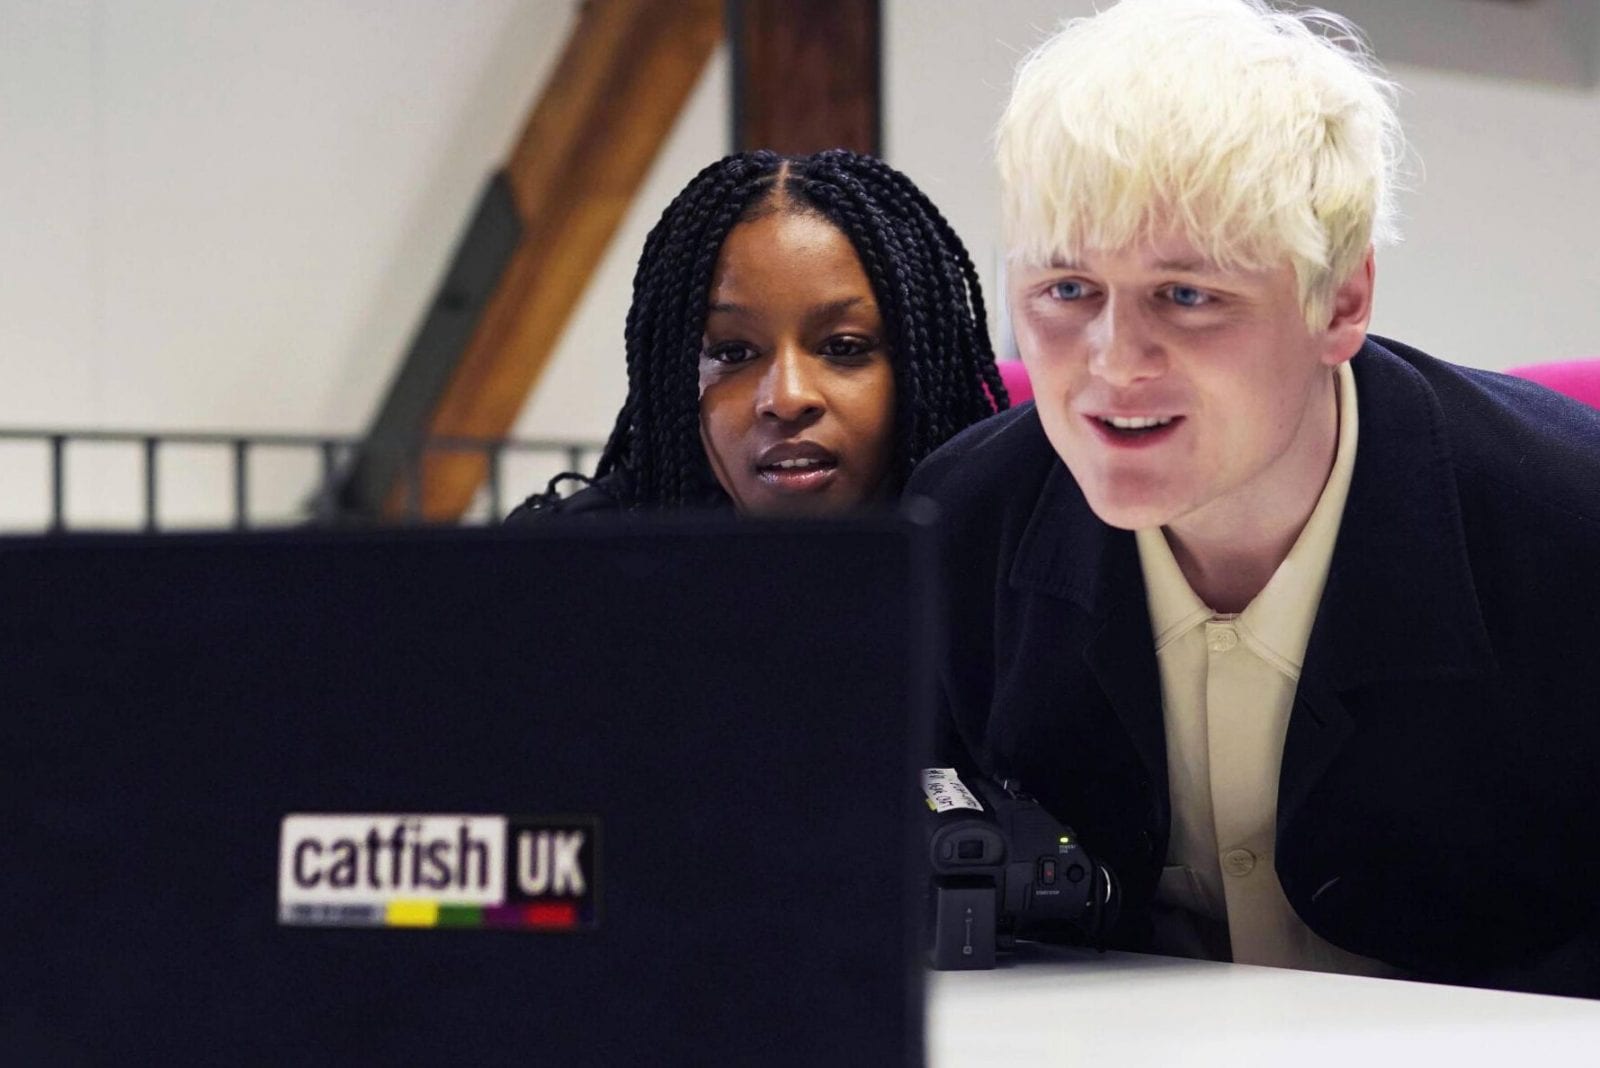 The first series of Catfish UK is coming to our screens next month, The Manc